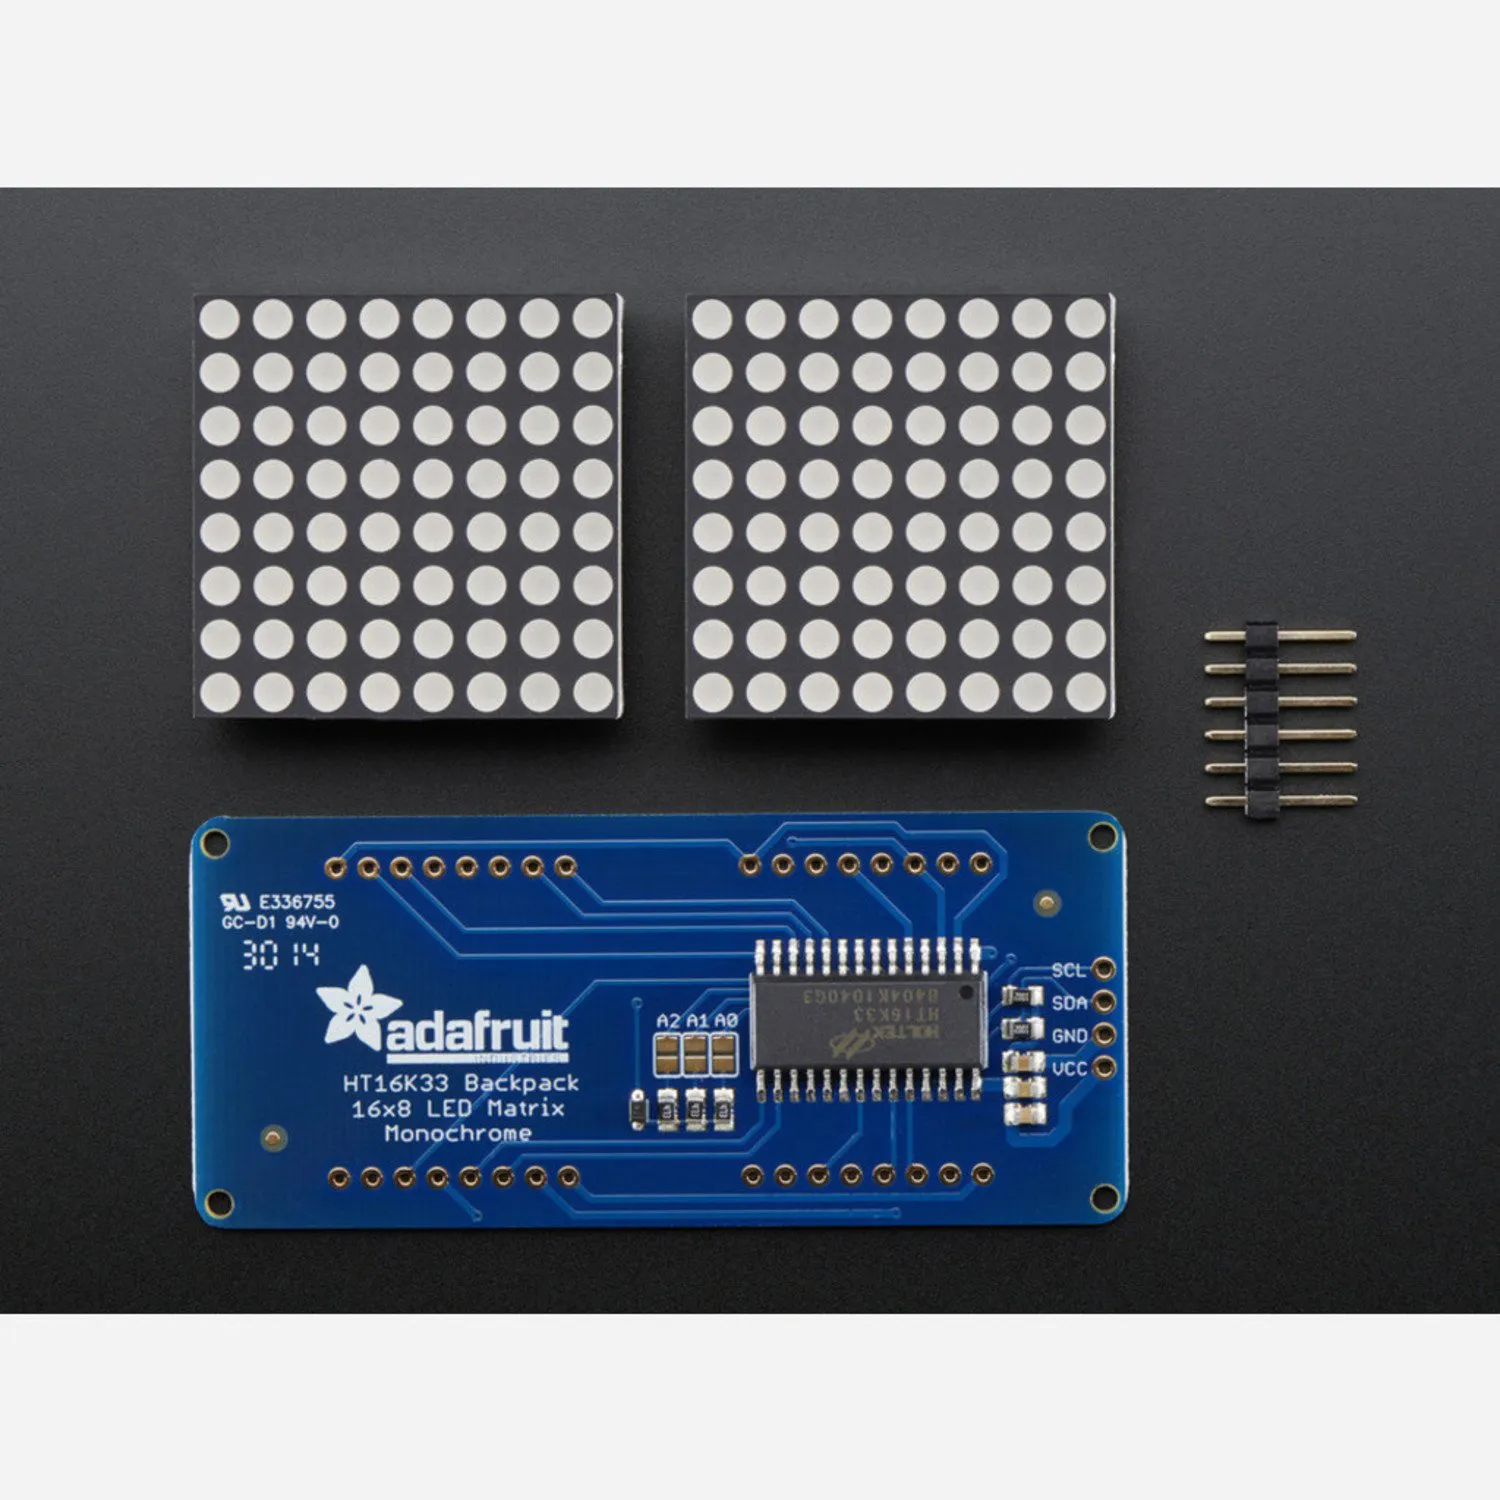 Photo of 16x8 1.2 LED Matrices+Backpack Round LEDs in Various Colors